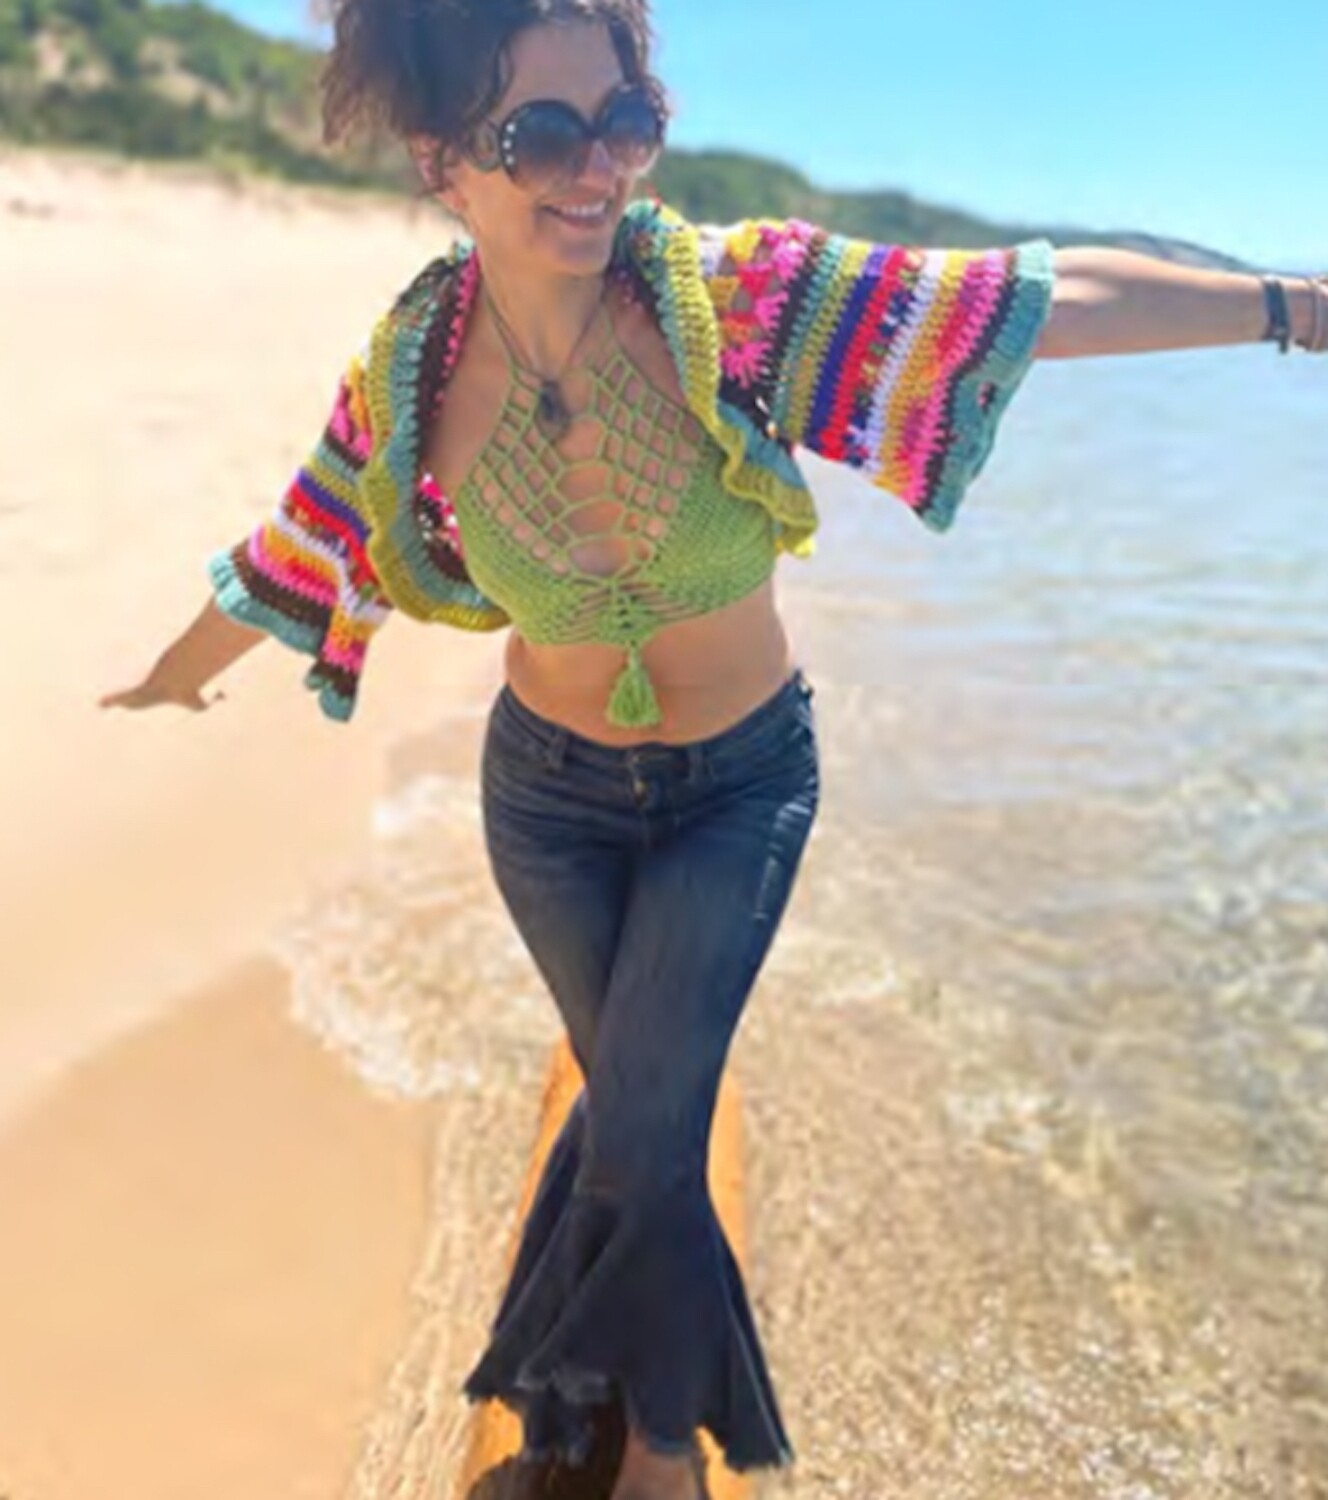 a light-skinned woman with her curly brown hair worn in a messy updo cavorts on a beach. Her arms are up and out "airplane-style". We see sand at her right, and turquoise water on her left with greenery in the distance. She's wearing jeans, a crocheted bikini top, and a multicolored crochet shrug, as well as large sunglasses and a chunky pendant. She's smiling and seems to be having fun!